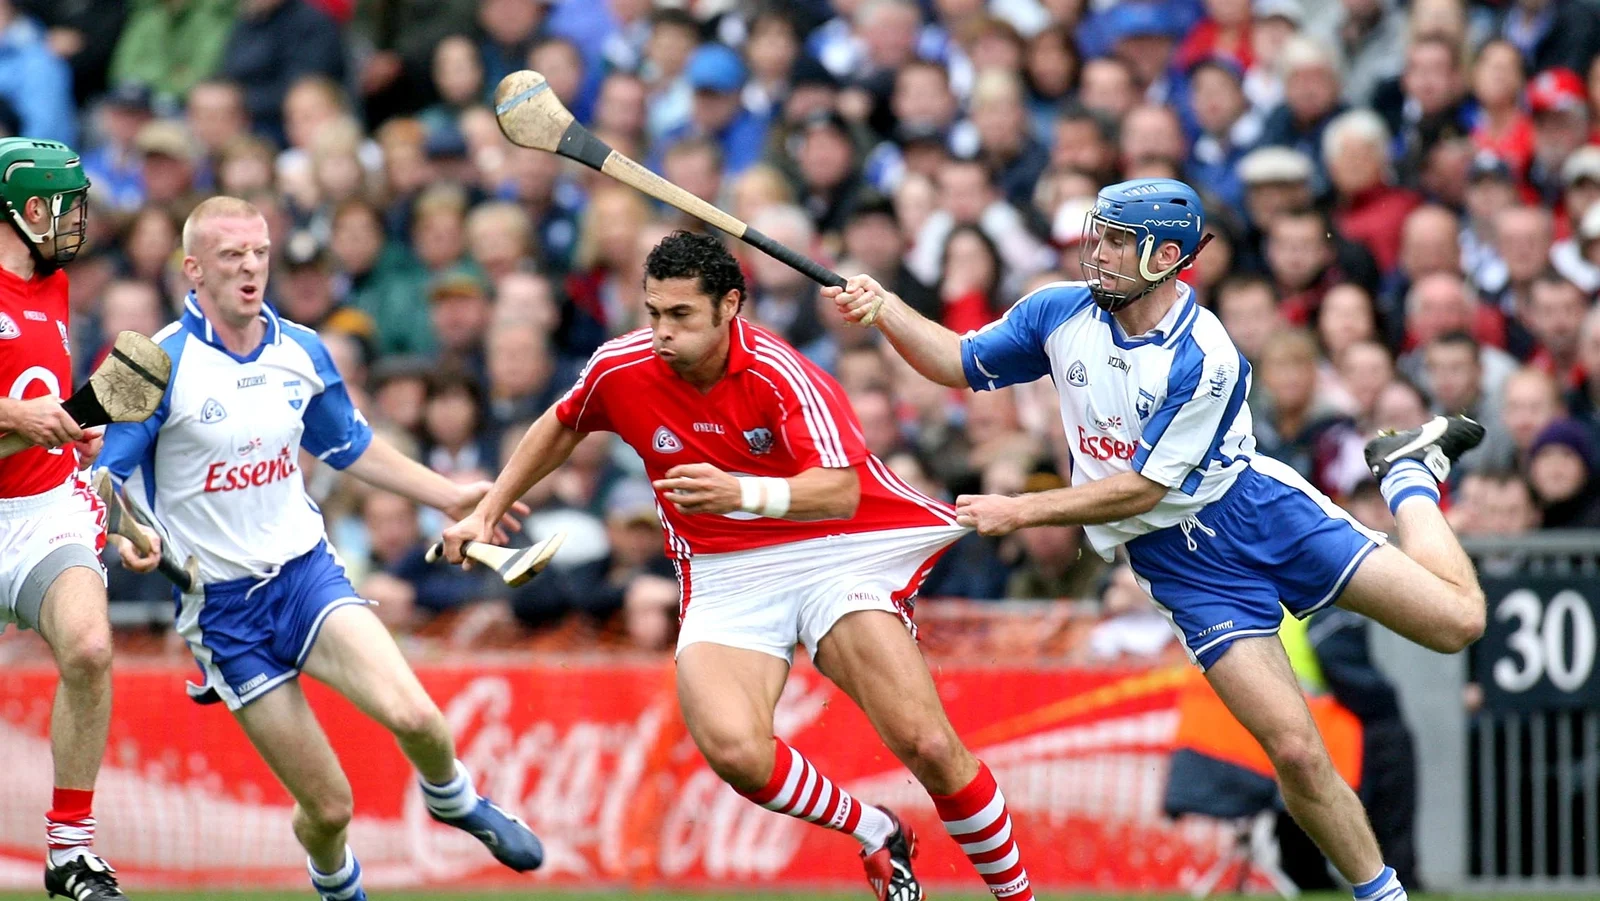 The classic Waterford/Cork rivalry defined hurling in the early part of this millennium.